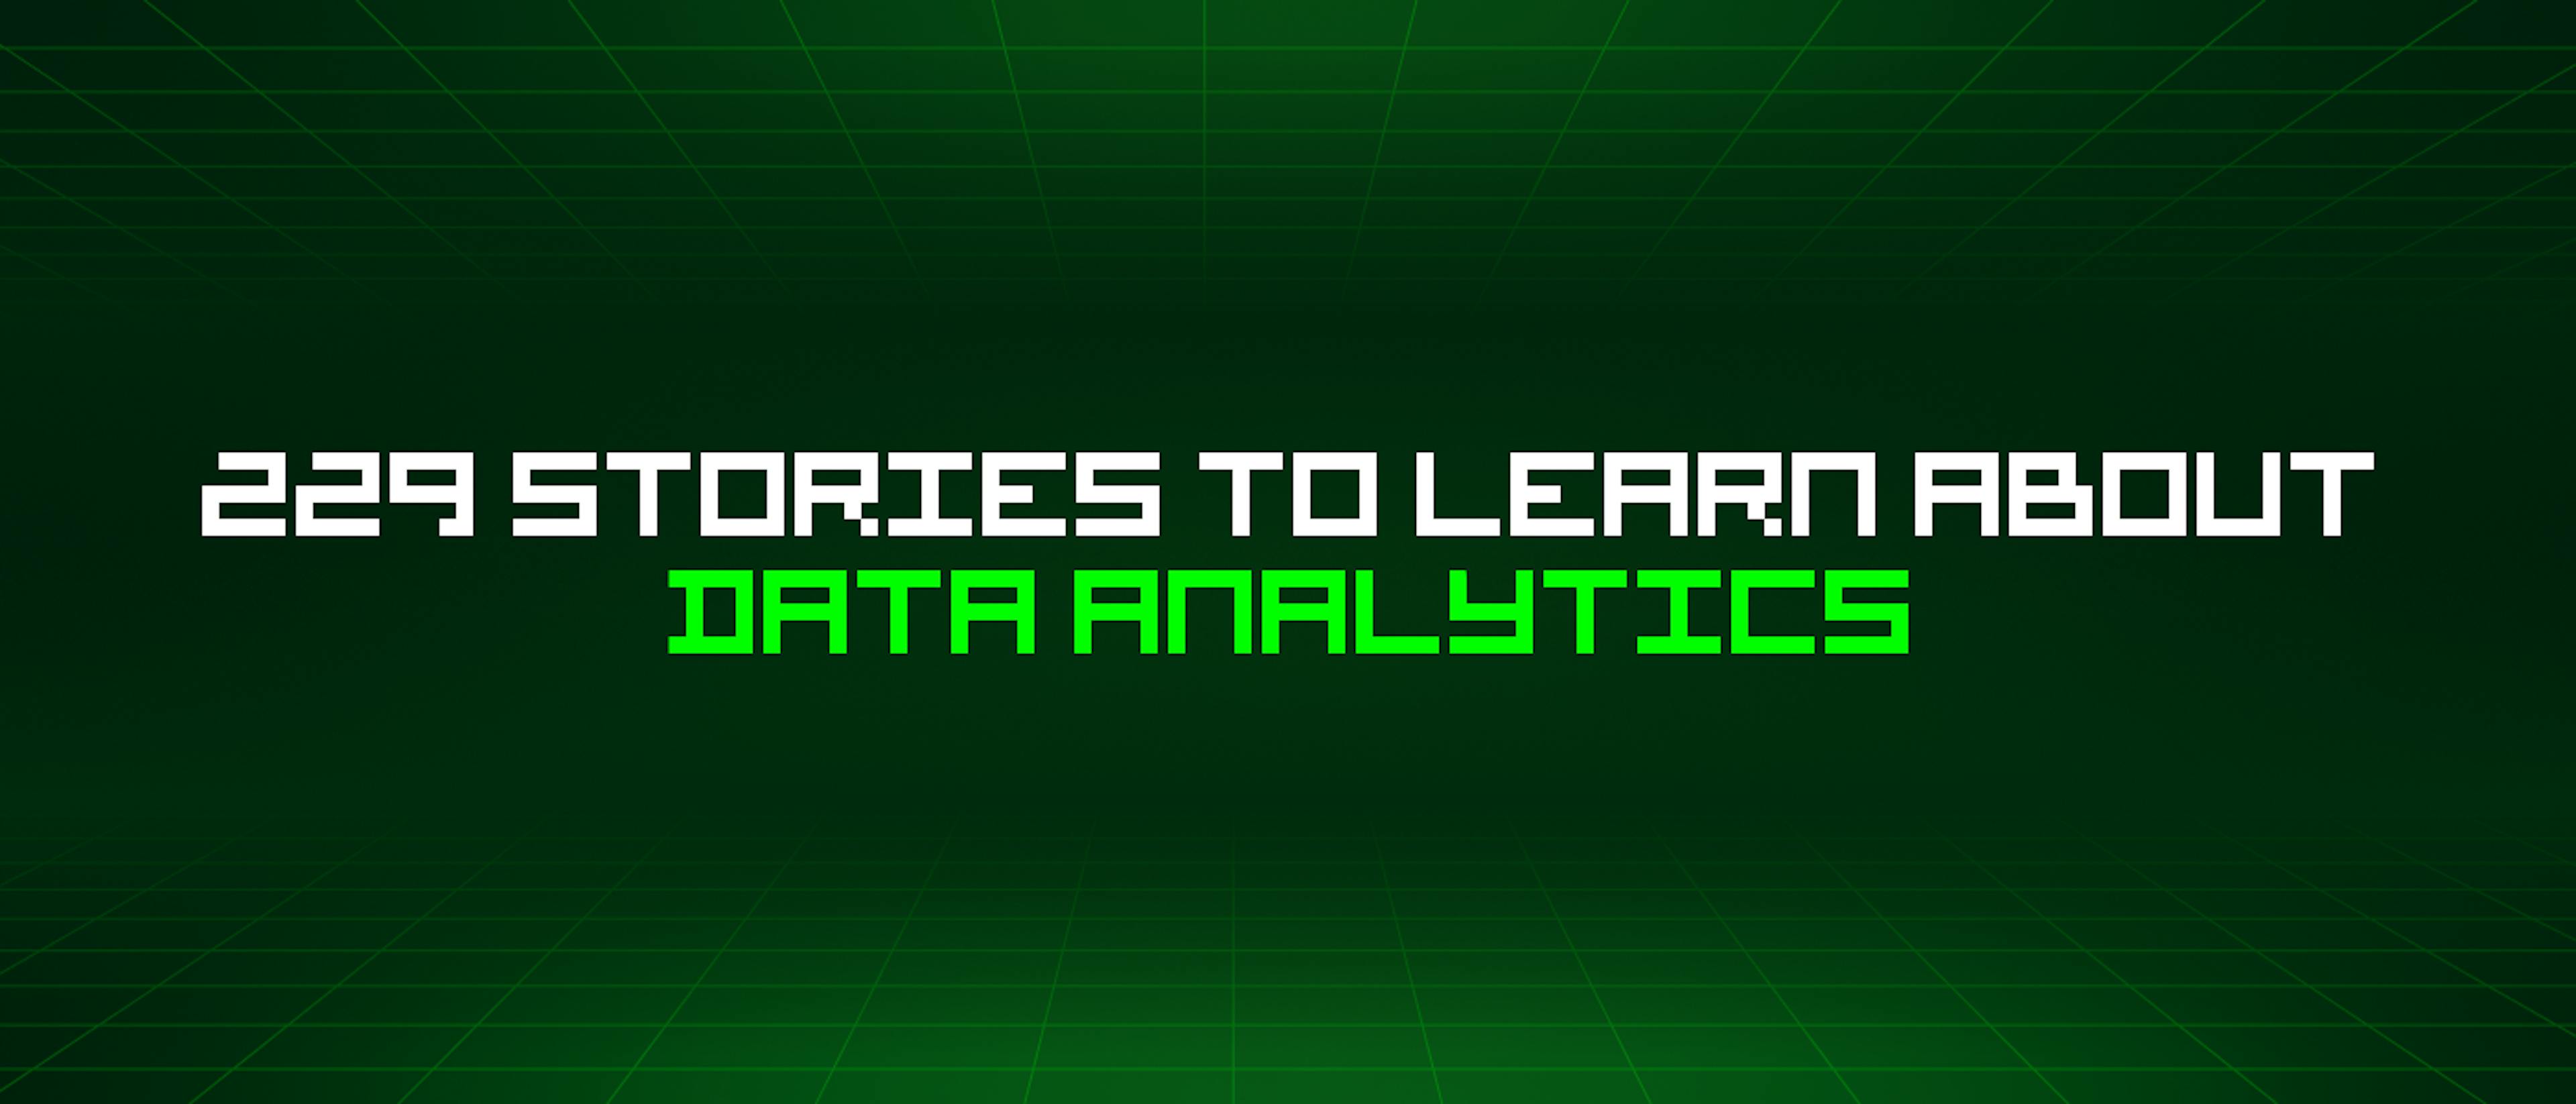 featured image - 229 Stories To Learn About Data Analytics